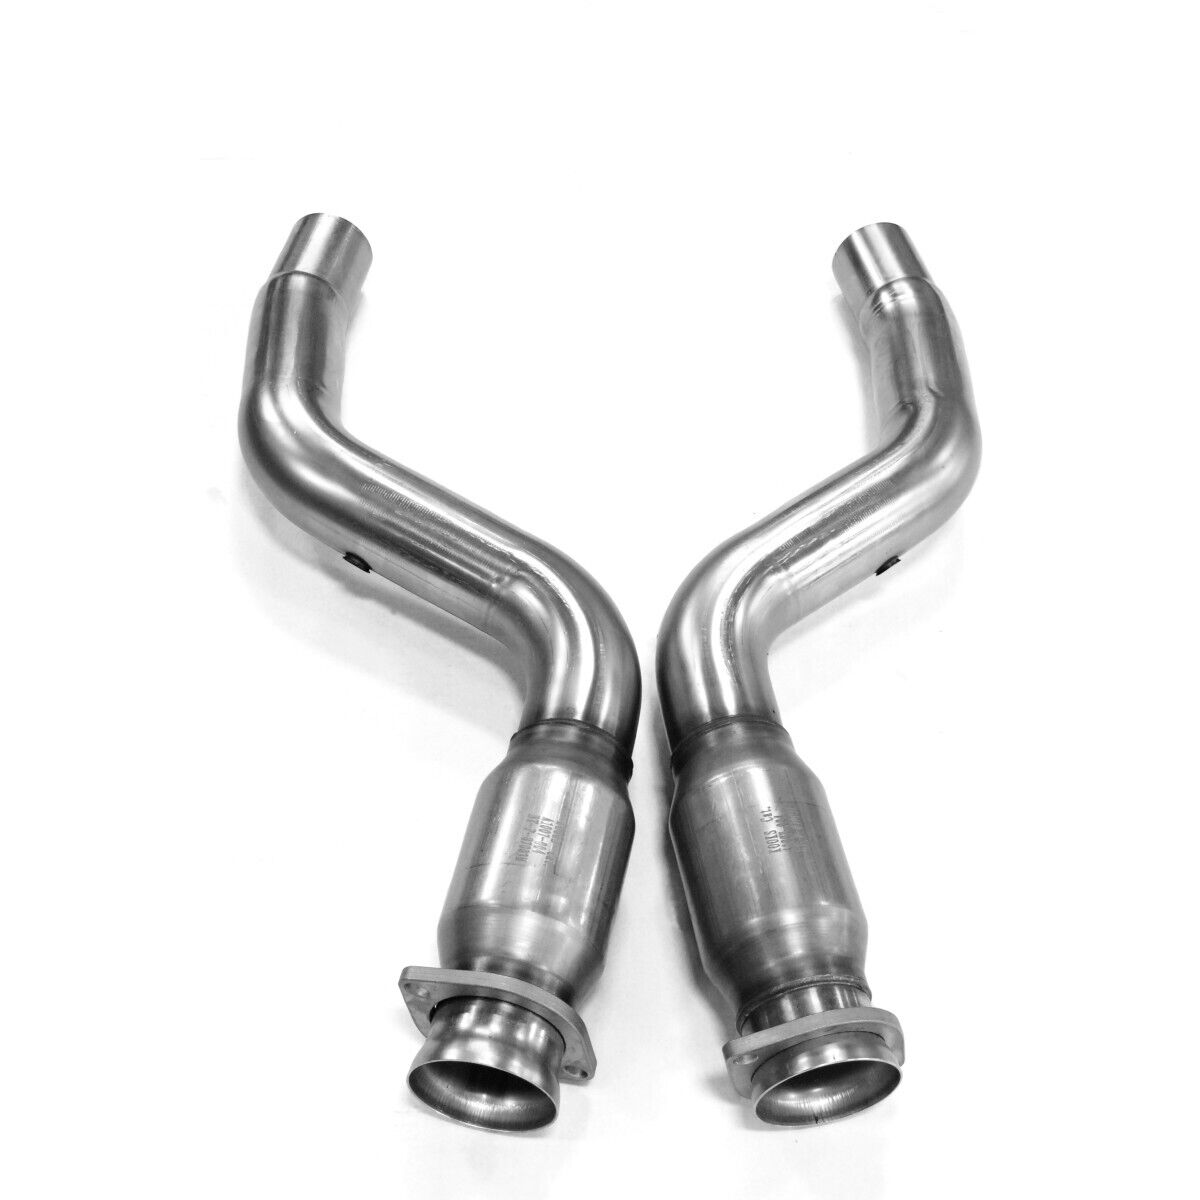 31013300 Kooks Exhaust Pipe Front for Dodge Charger Chrysler 300 Challenger